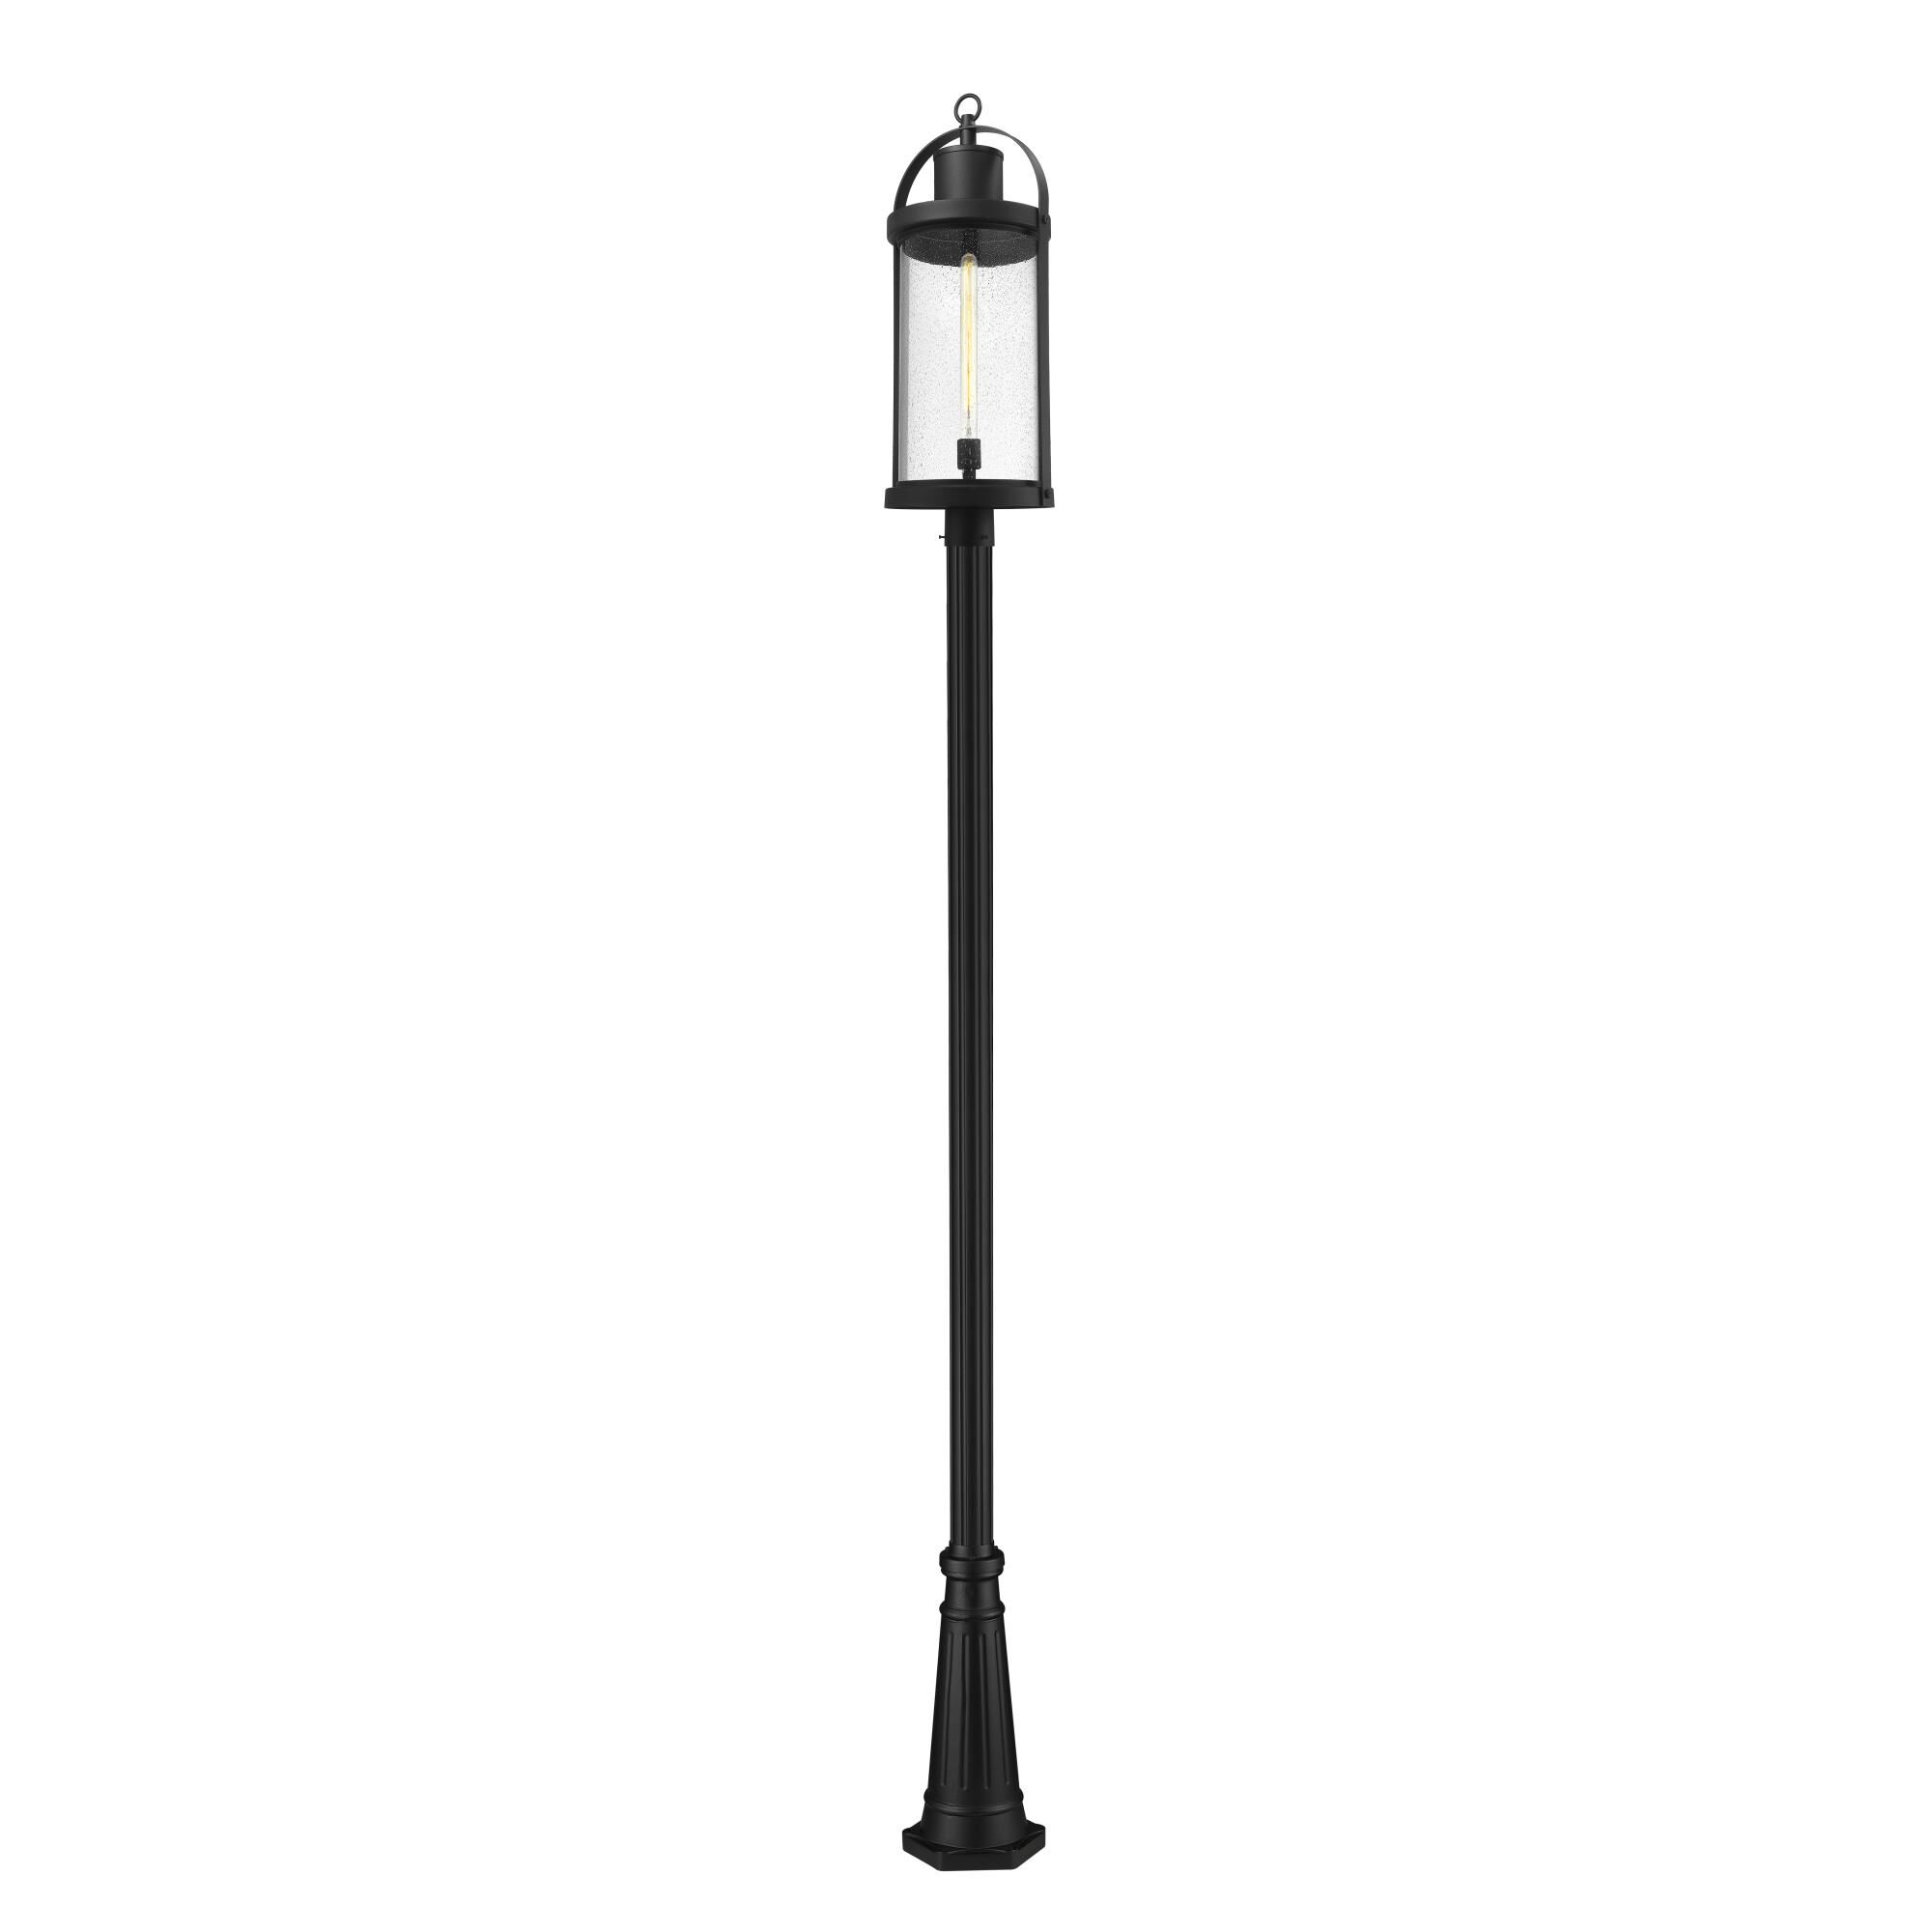 Photos - Floodlight / Street Light Z-Lite Roundhouse 125 Inch Tall Outdoor Post Lamp Roundhouse - 569PHXL-519